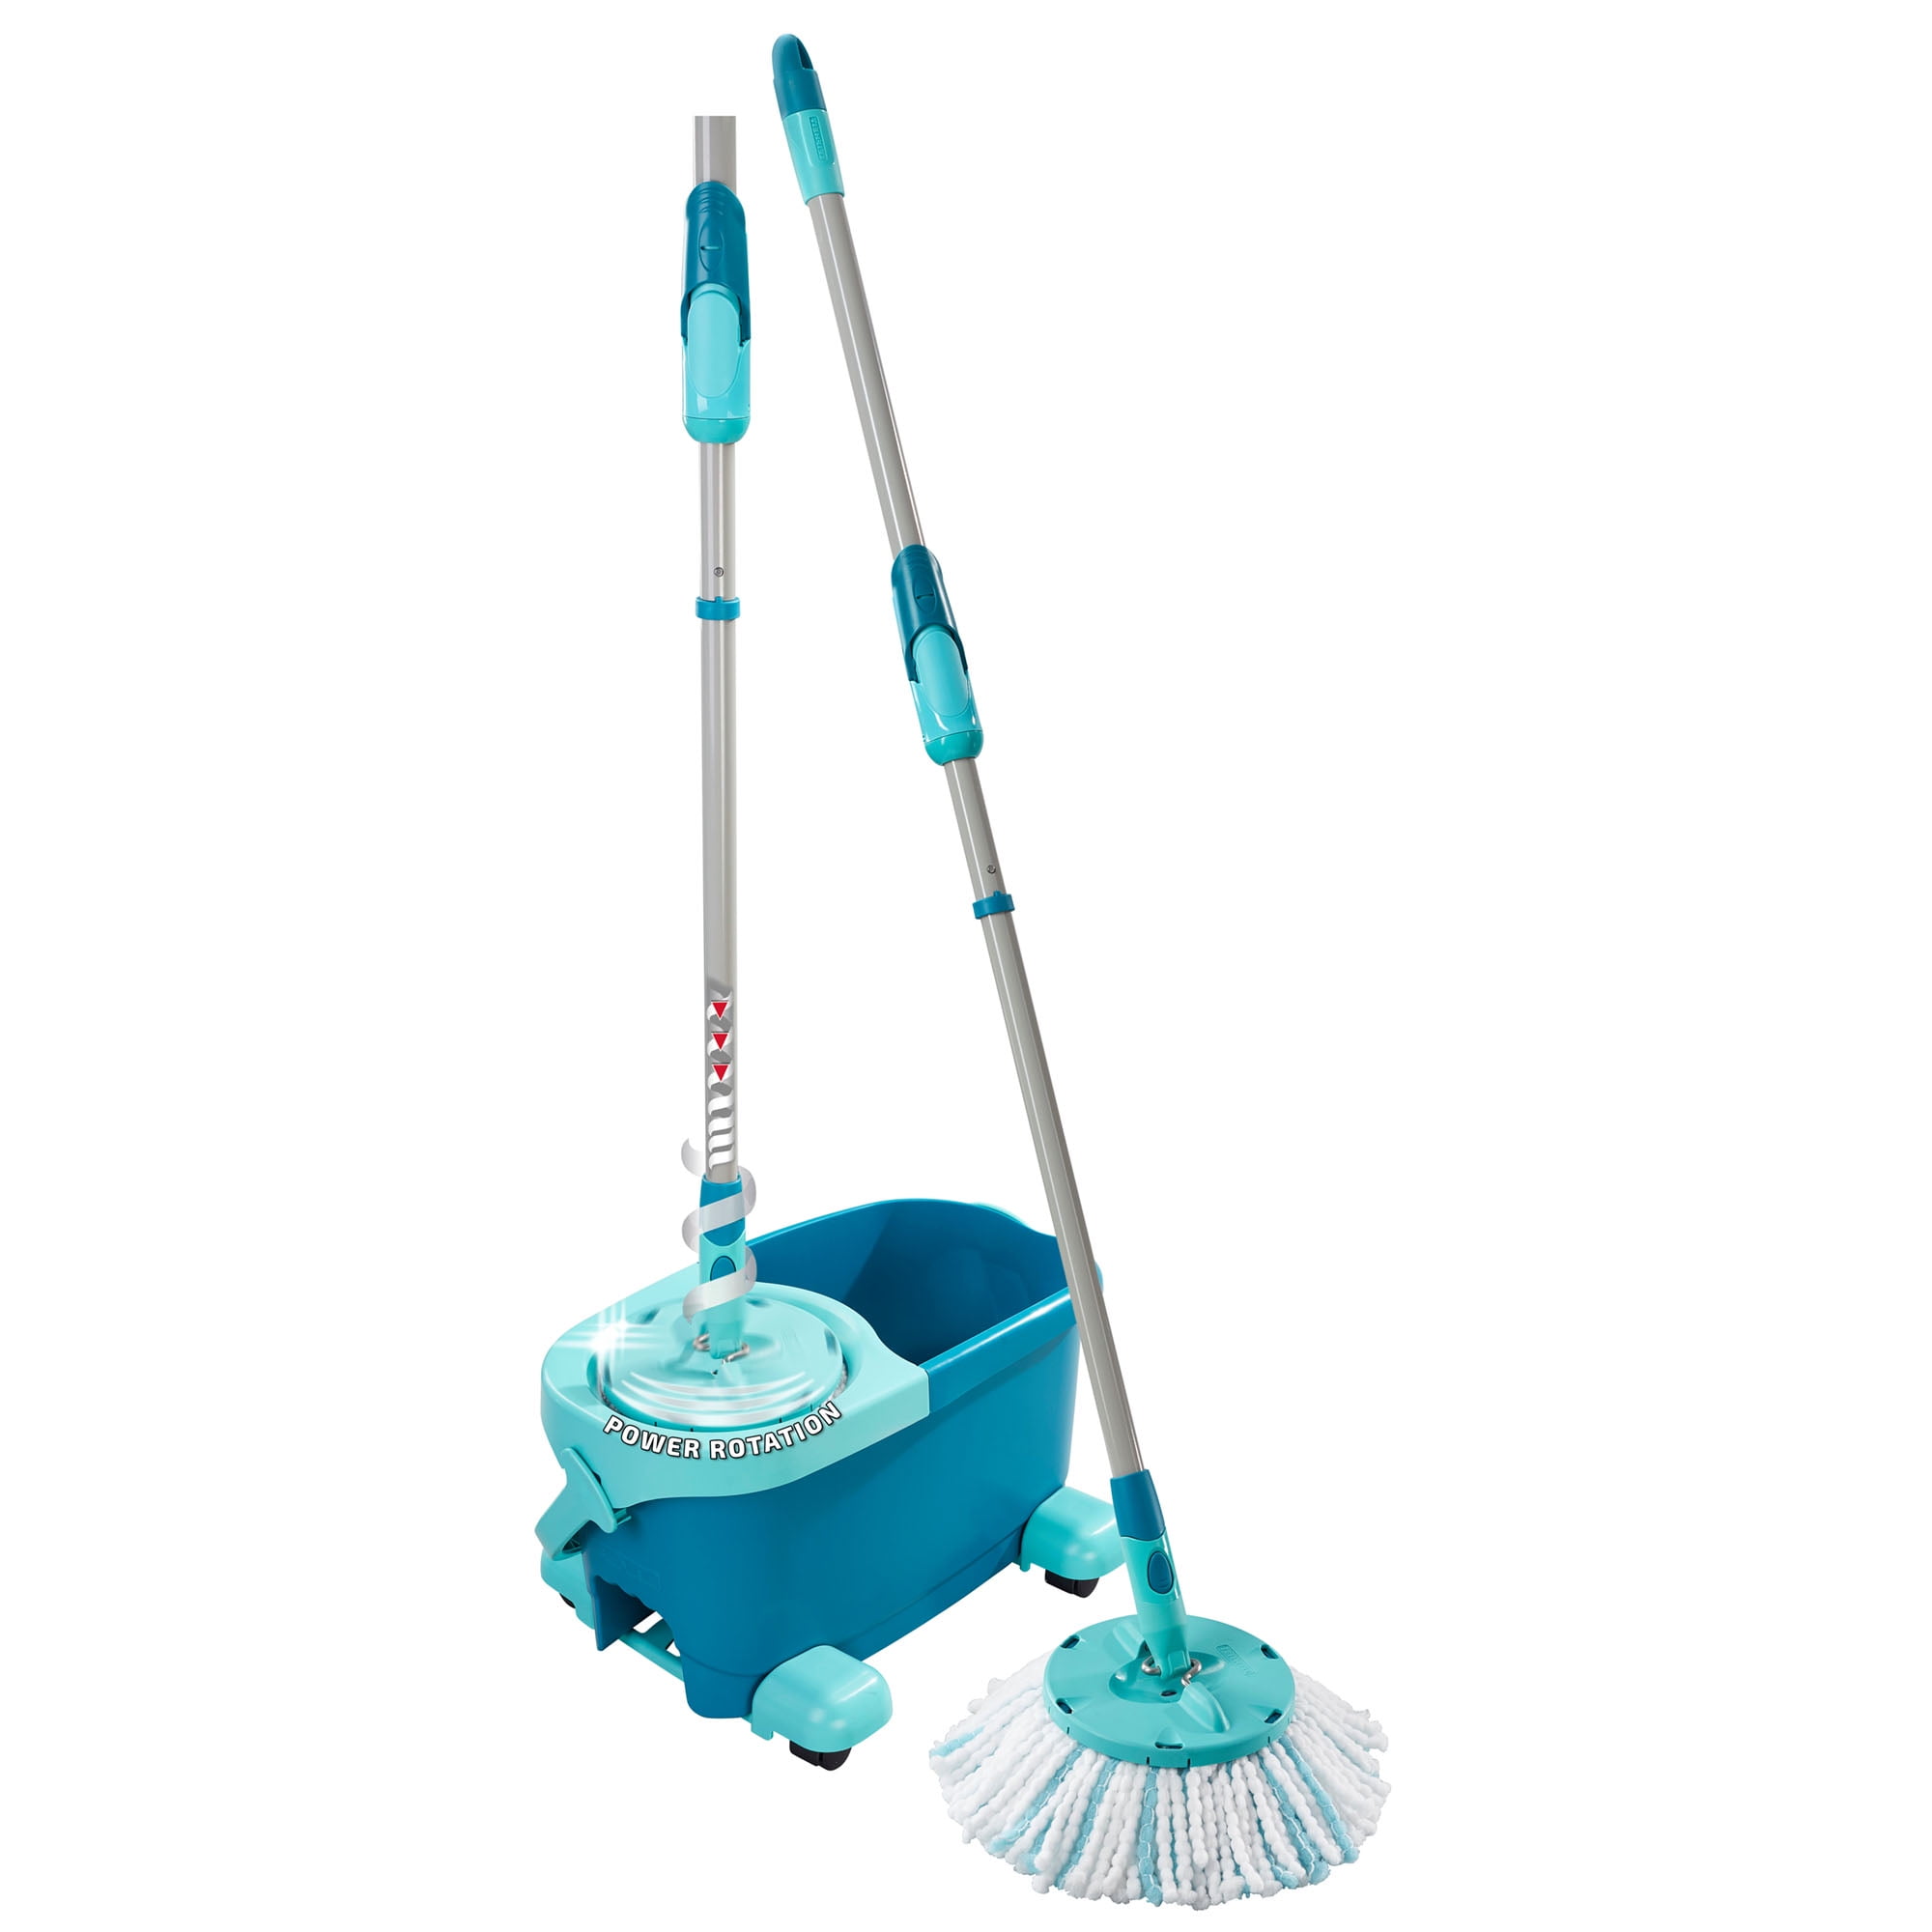 Leifheit Clean Twist Disc Mop Ergo Mobile Set, Moisture Controlled Spin,  Wheeled Bucket, Faster Cleaning, Easy-Steer Micro Fibre 33cm Head with 360°